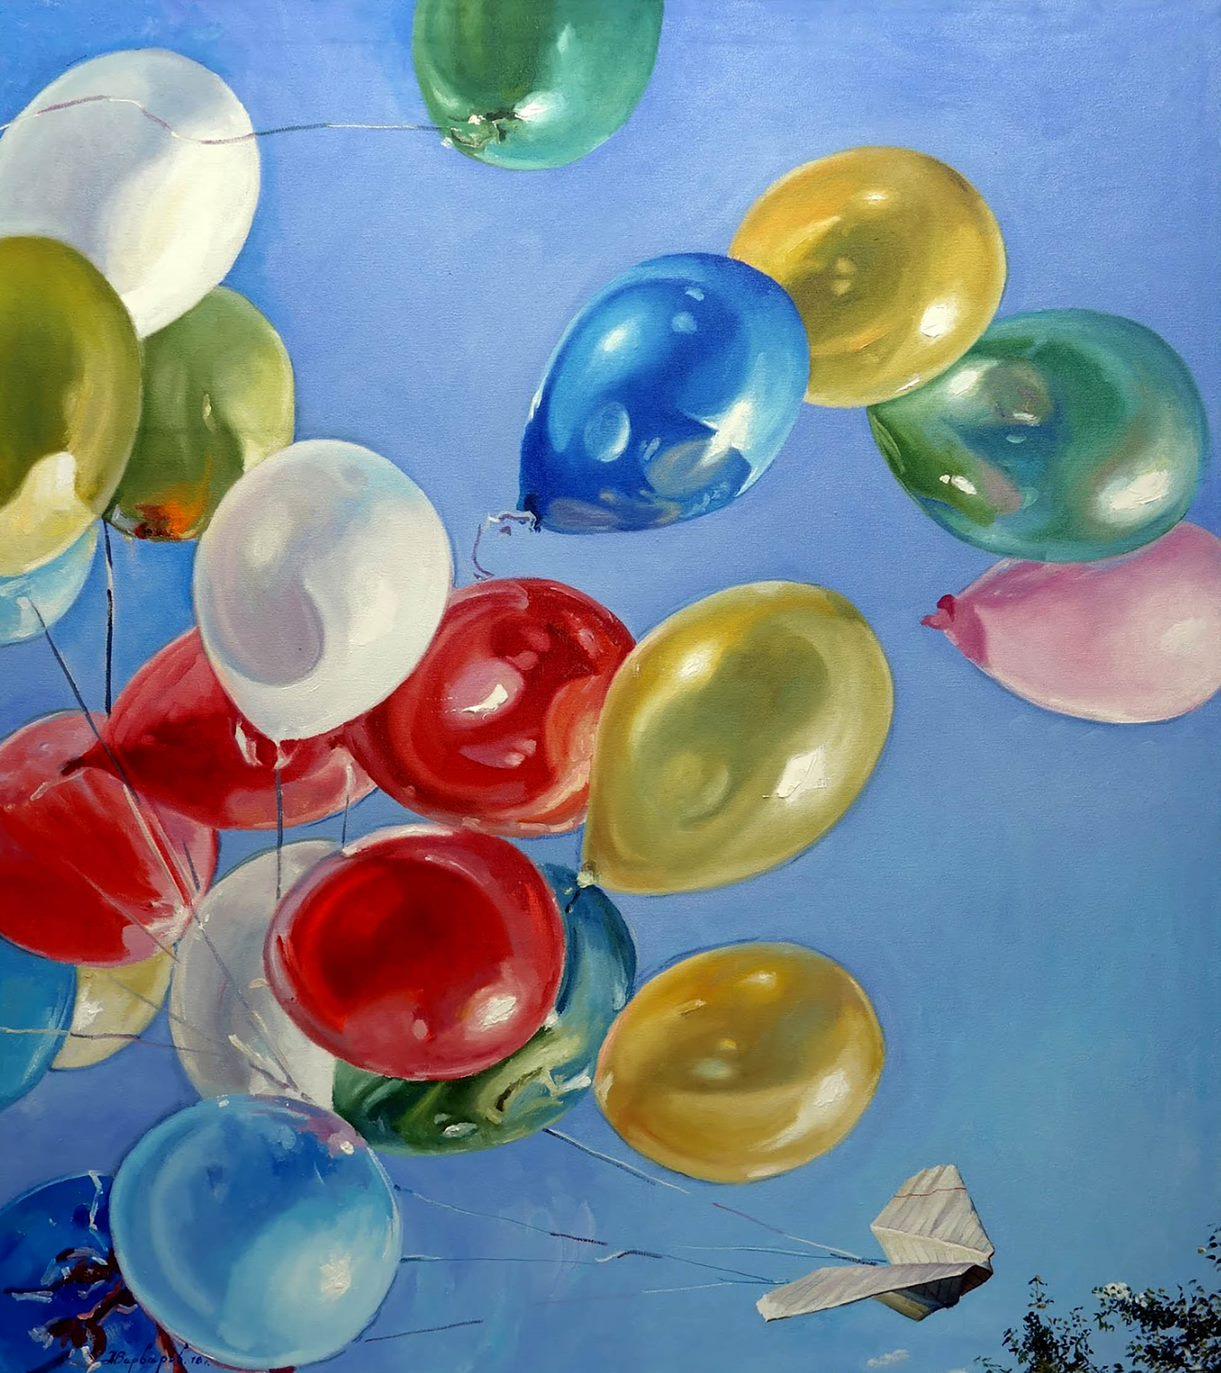 Carrier, Balloons, Canvas Art, Original oil Painting, One of a Kind